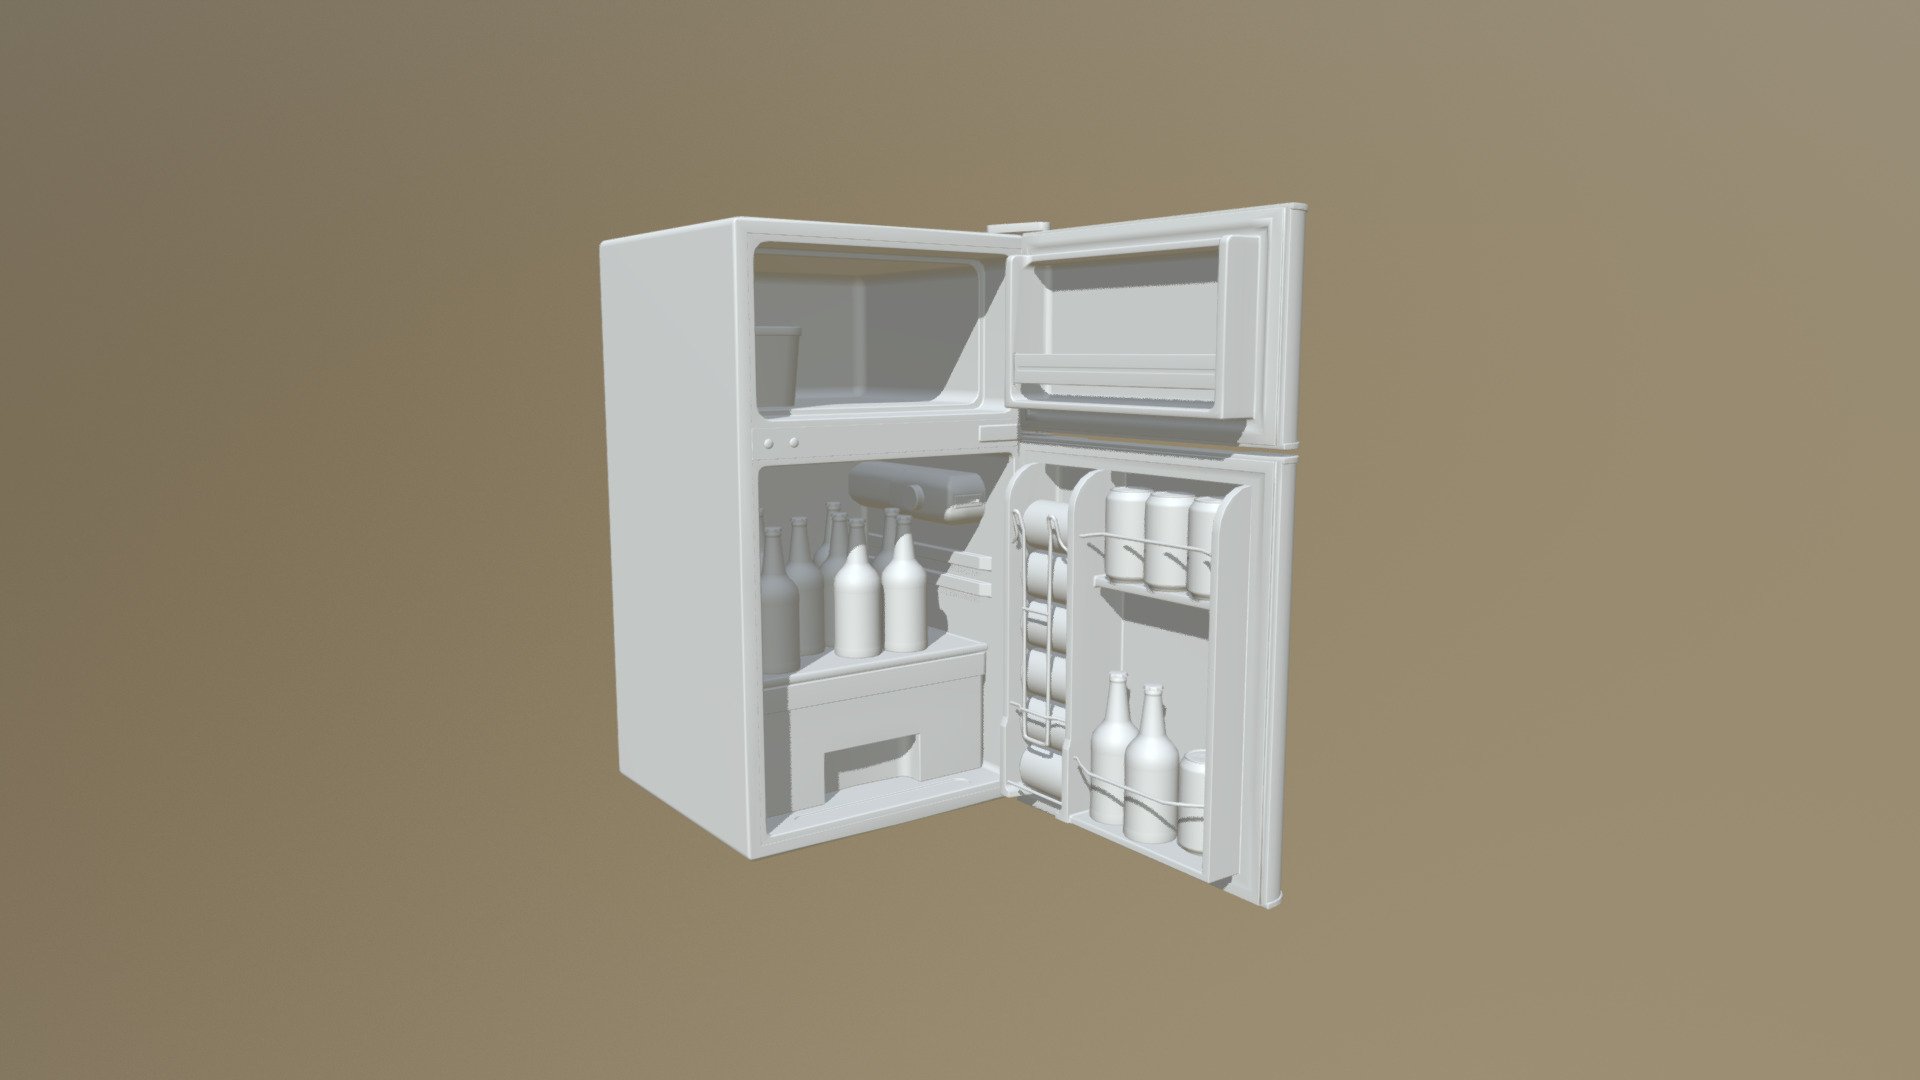 A project for my Advanced Seminar course. I decided to make a mini fridge based on the one in my apartment. I plan to return to the project next semester to finish it 3d model